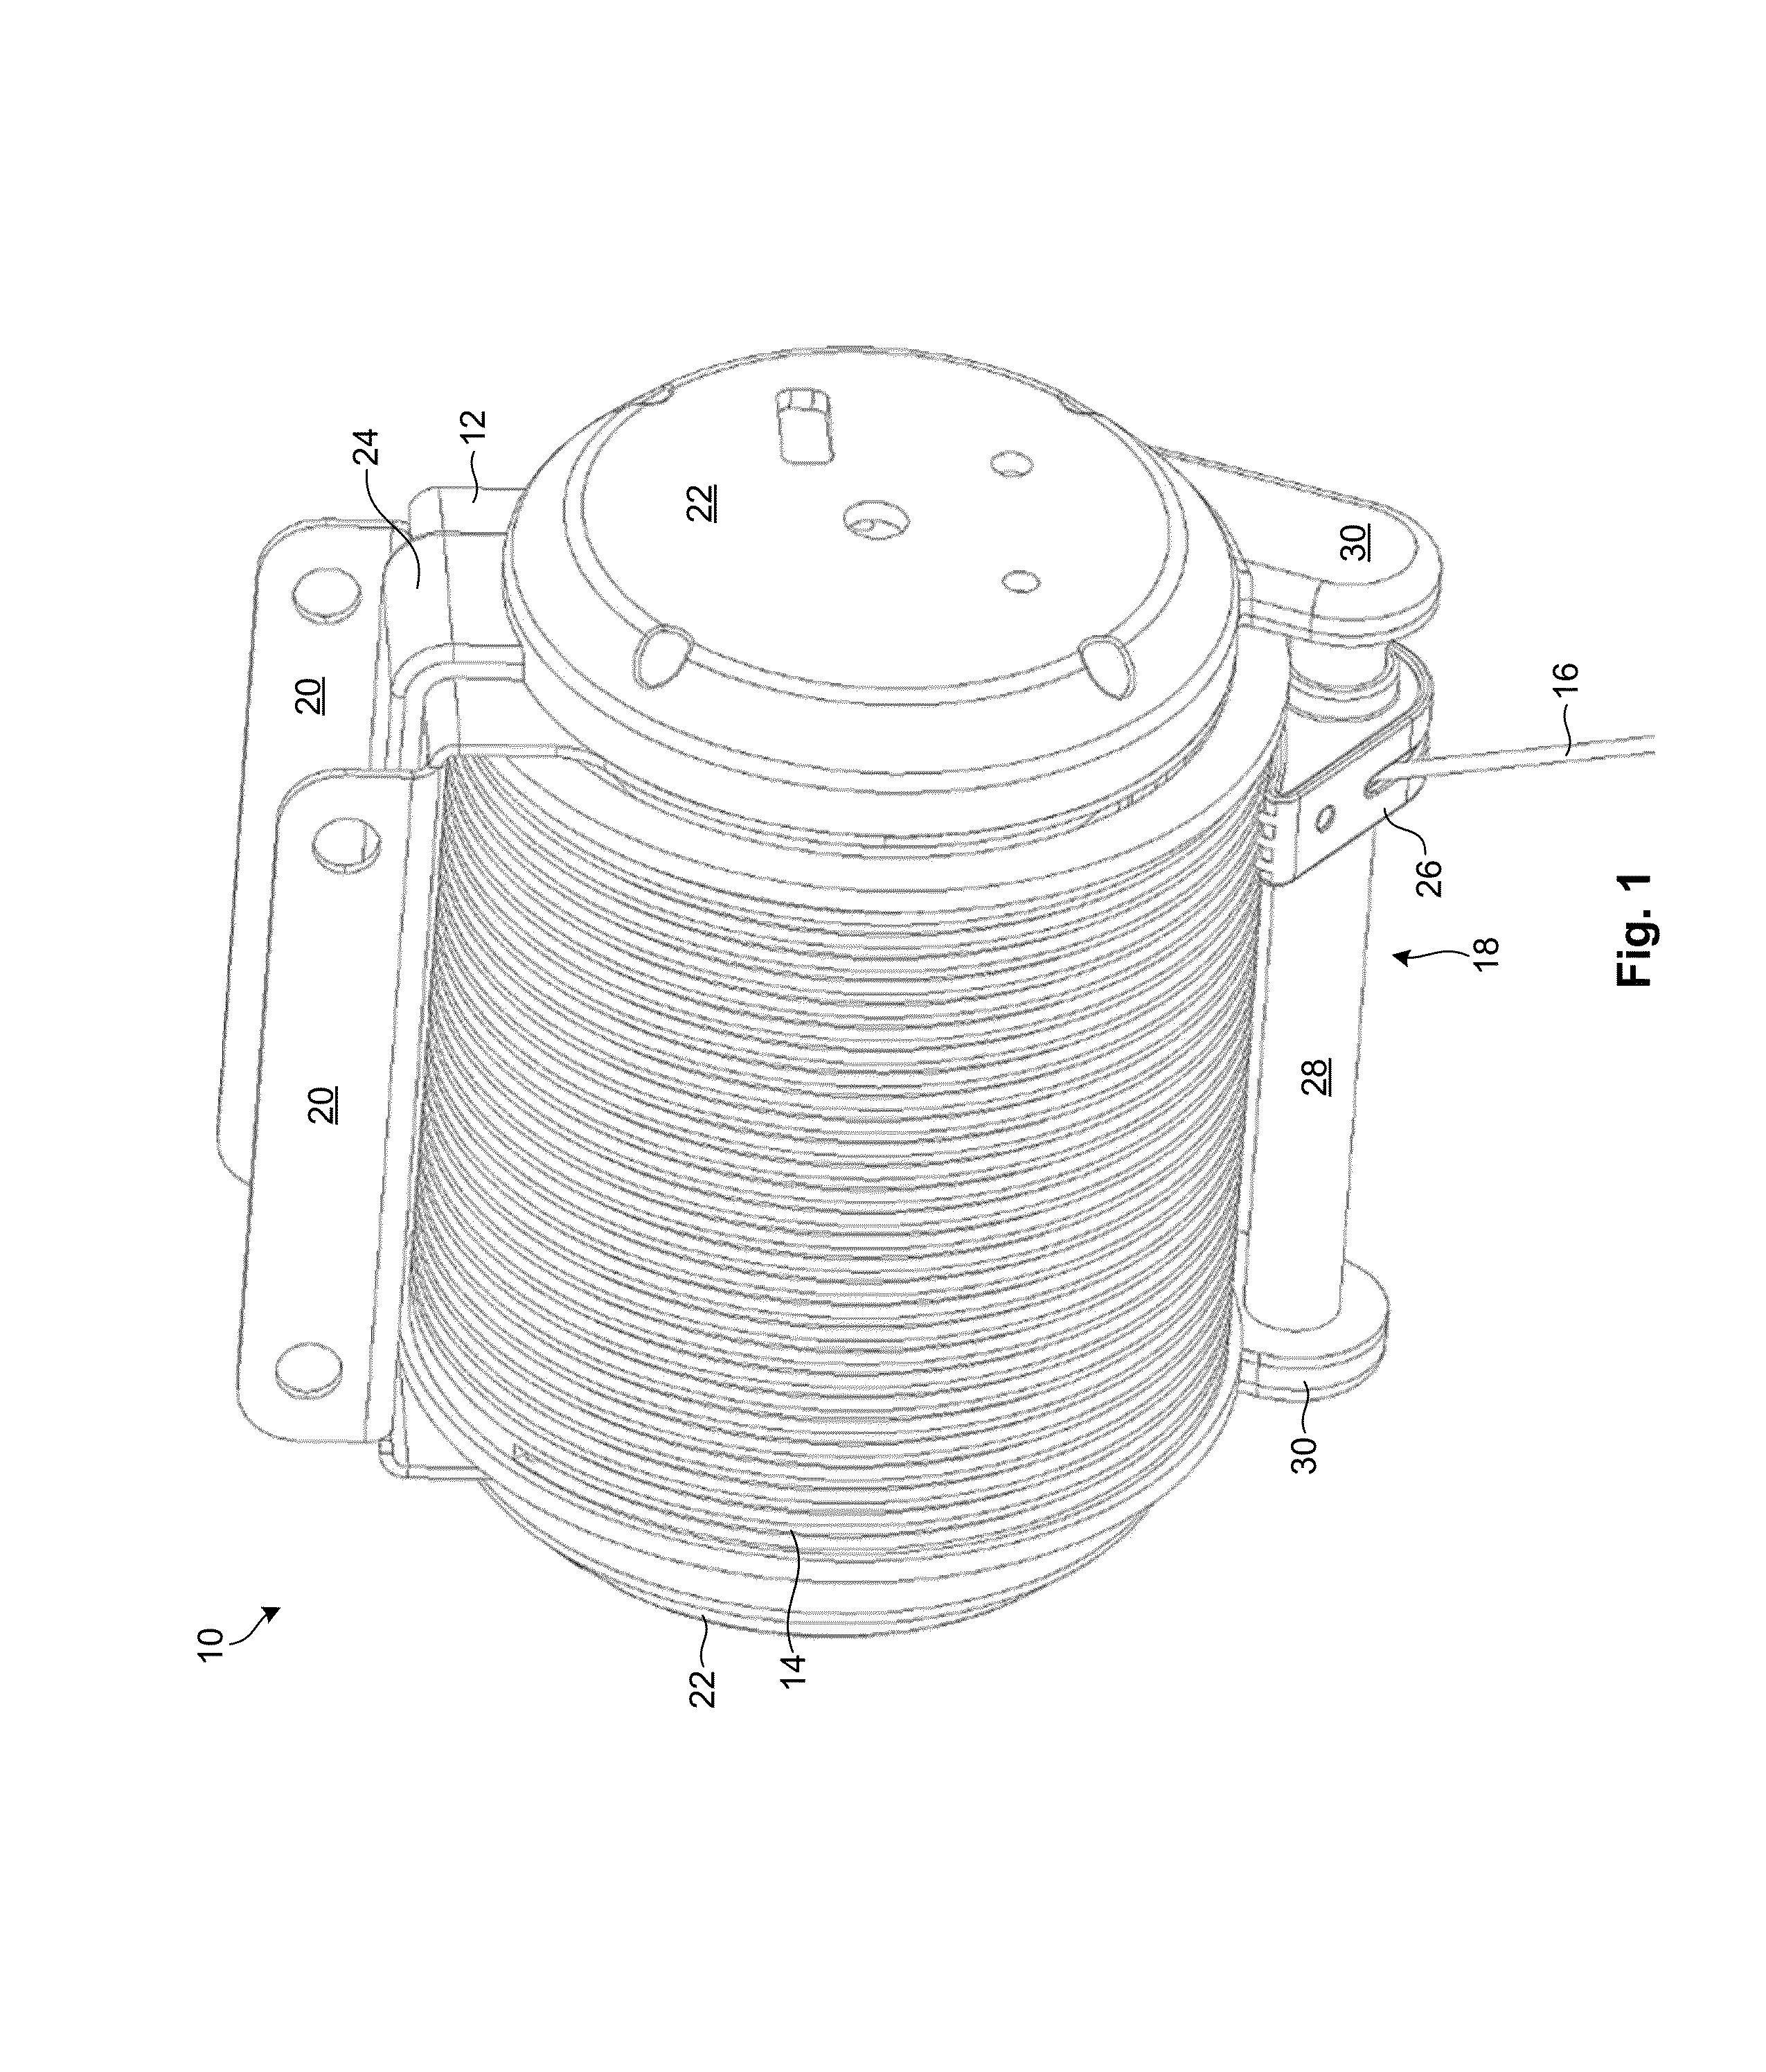 Grooved drum and associated roller for motorized lifting device